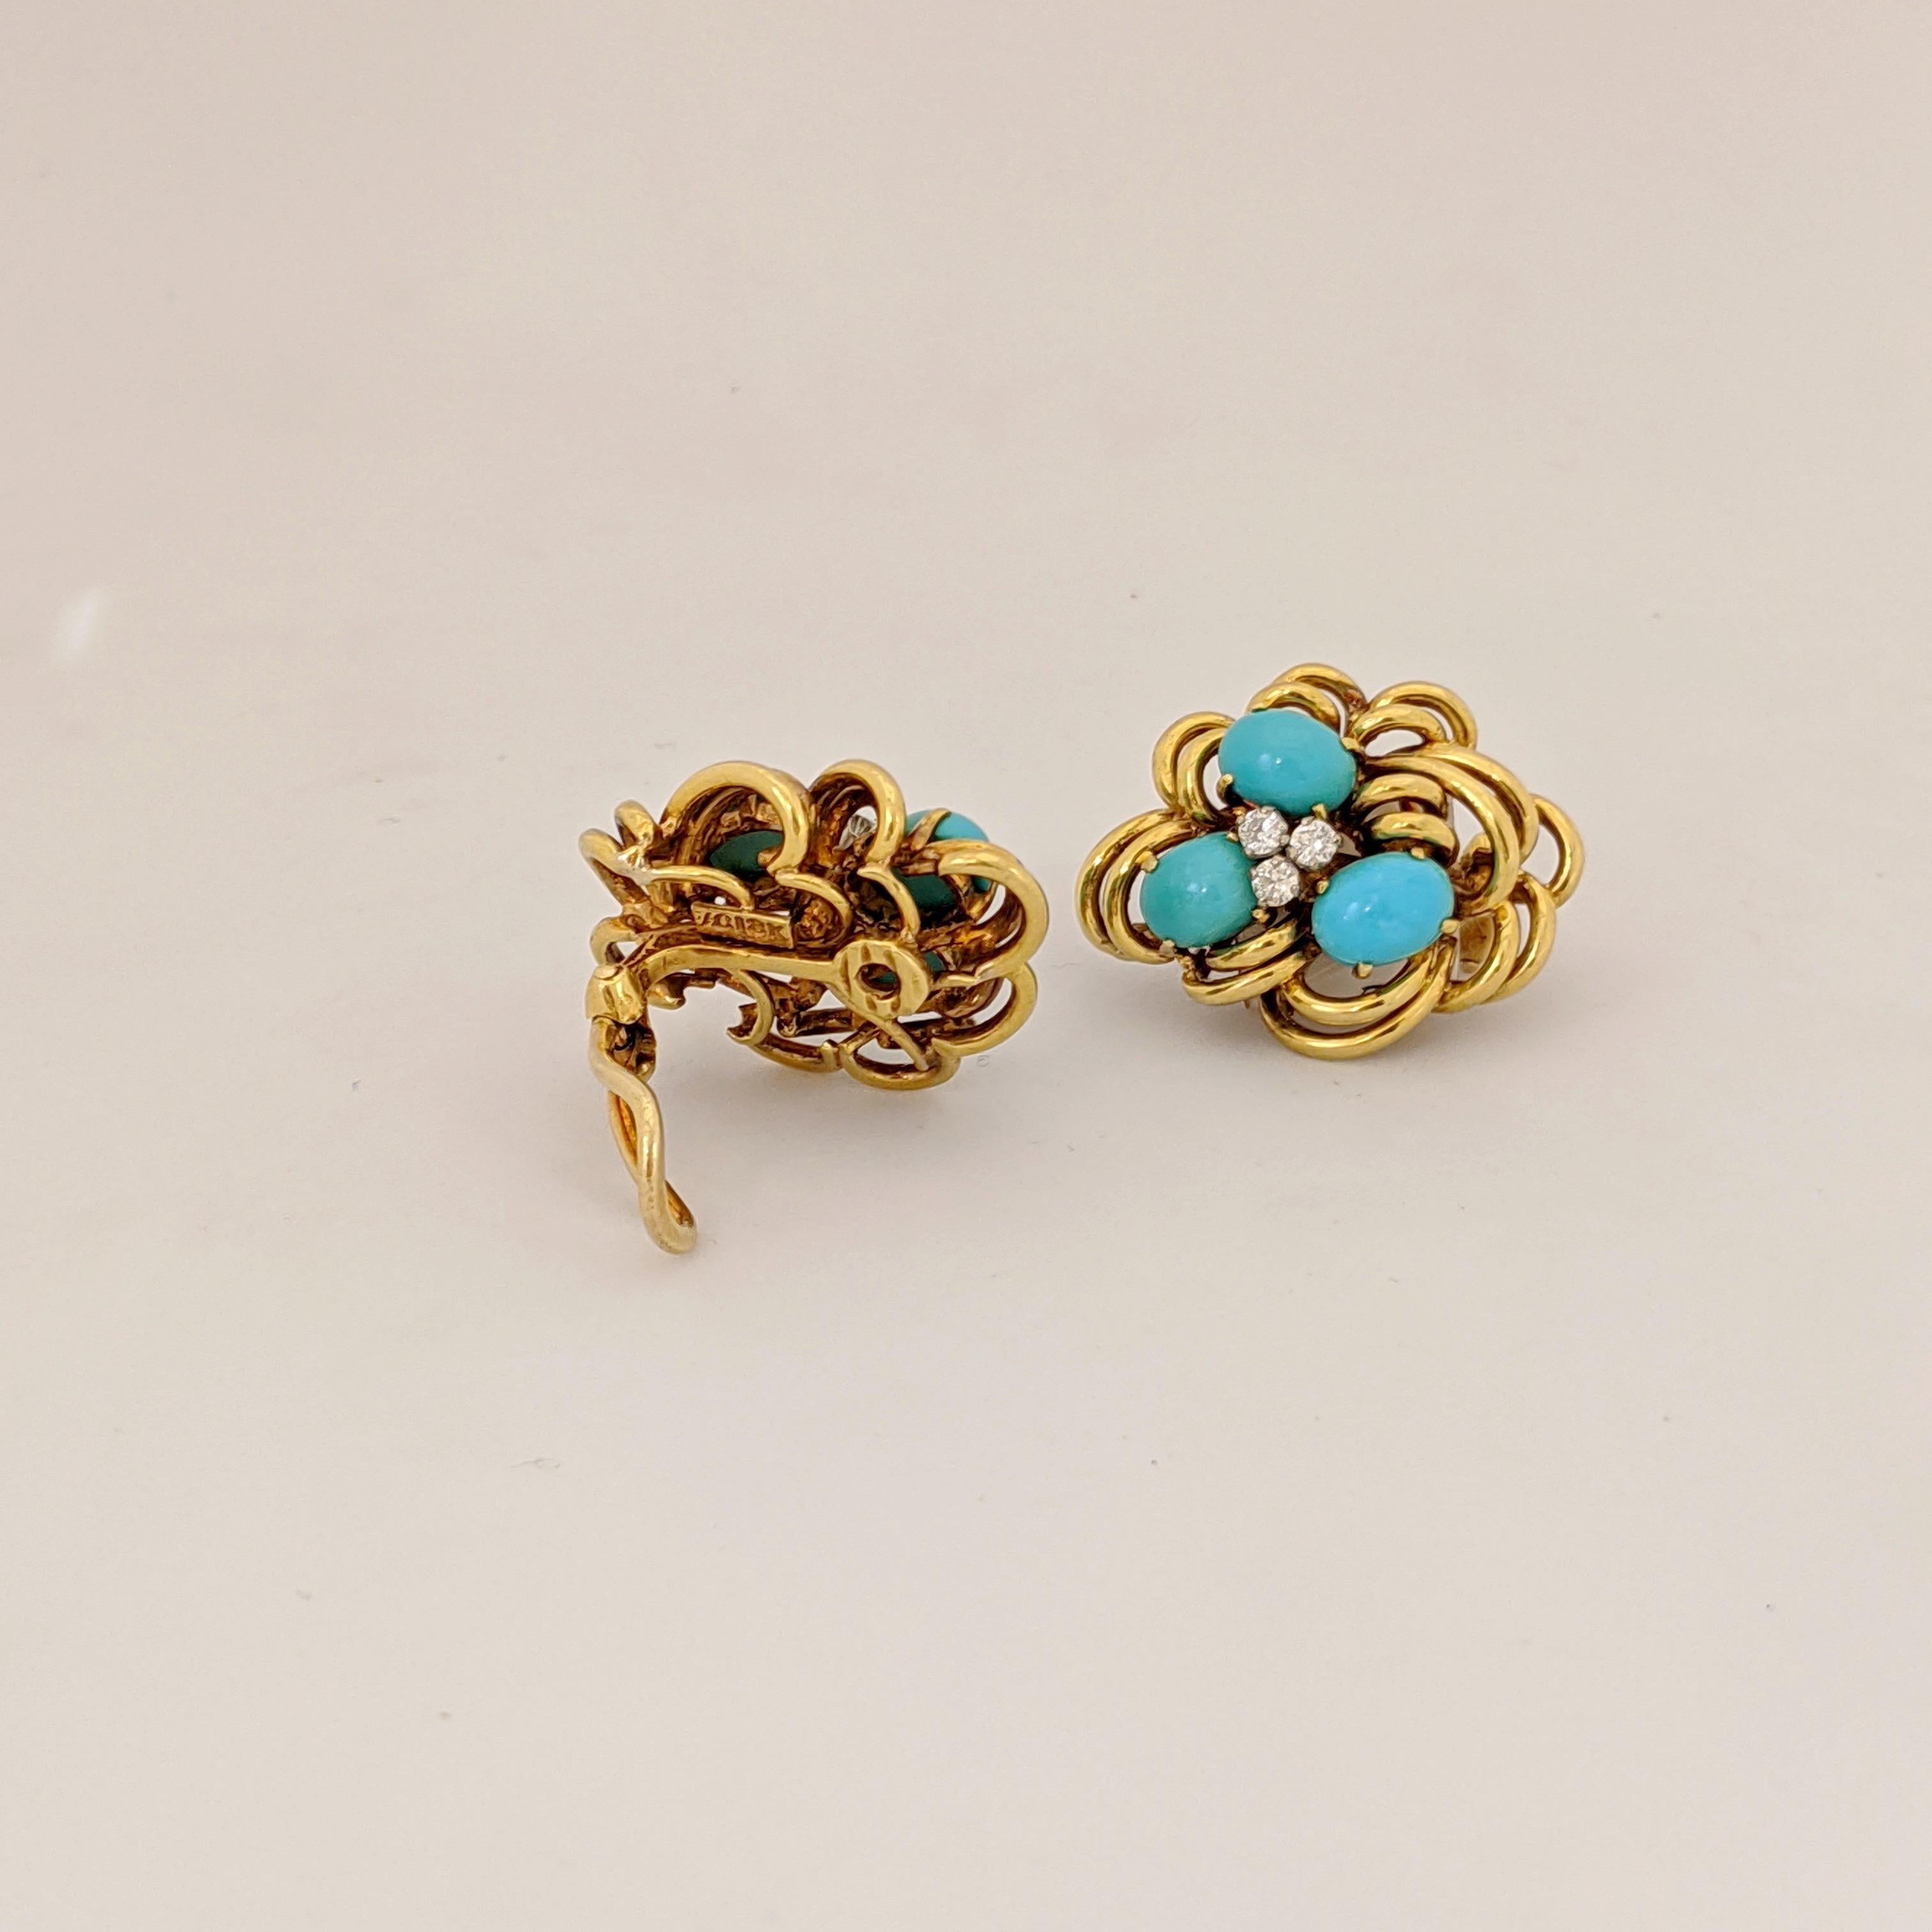 Beautiful 18 karat yellow gold cluster earrings centering three oval Turquoise stones, and three round brilliant cut  Diamonds in each earring. The earrings have a fold down post with a French clip back making them suitable for pierced and non